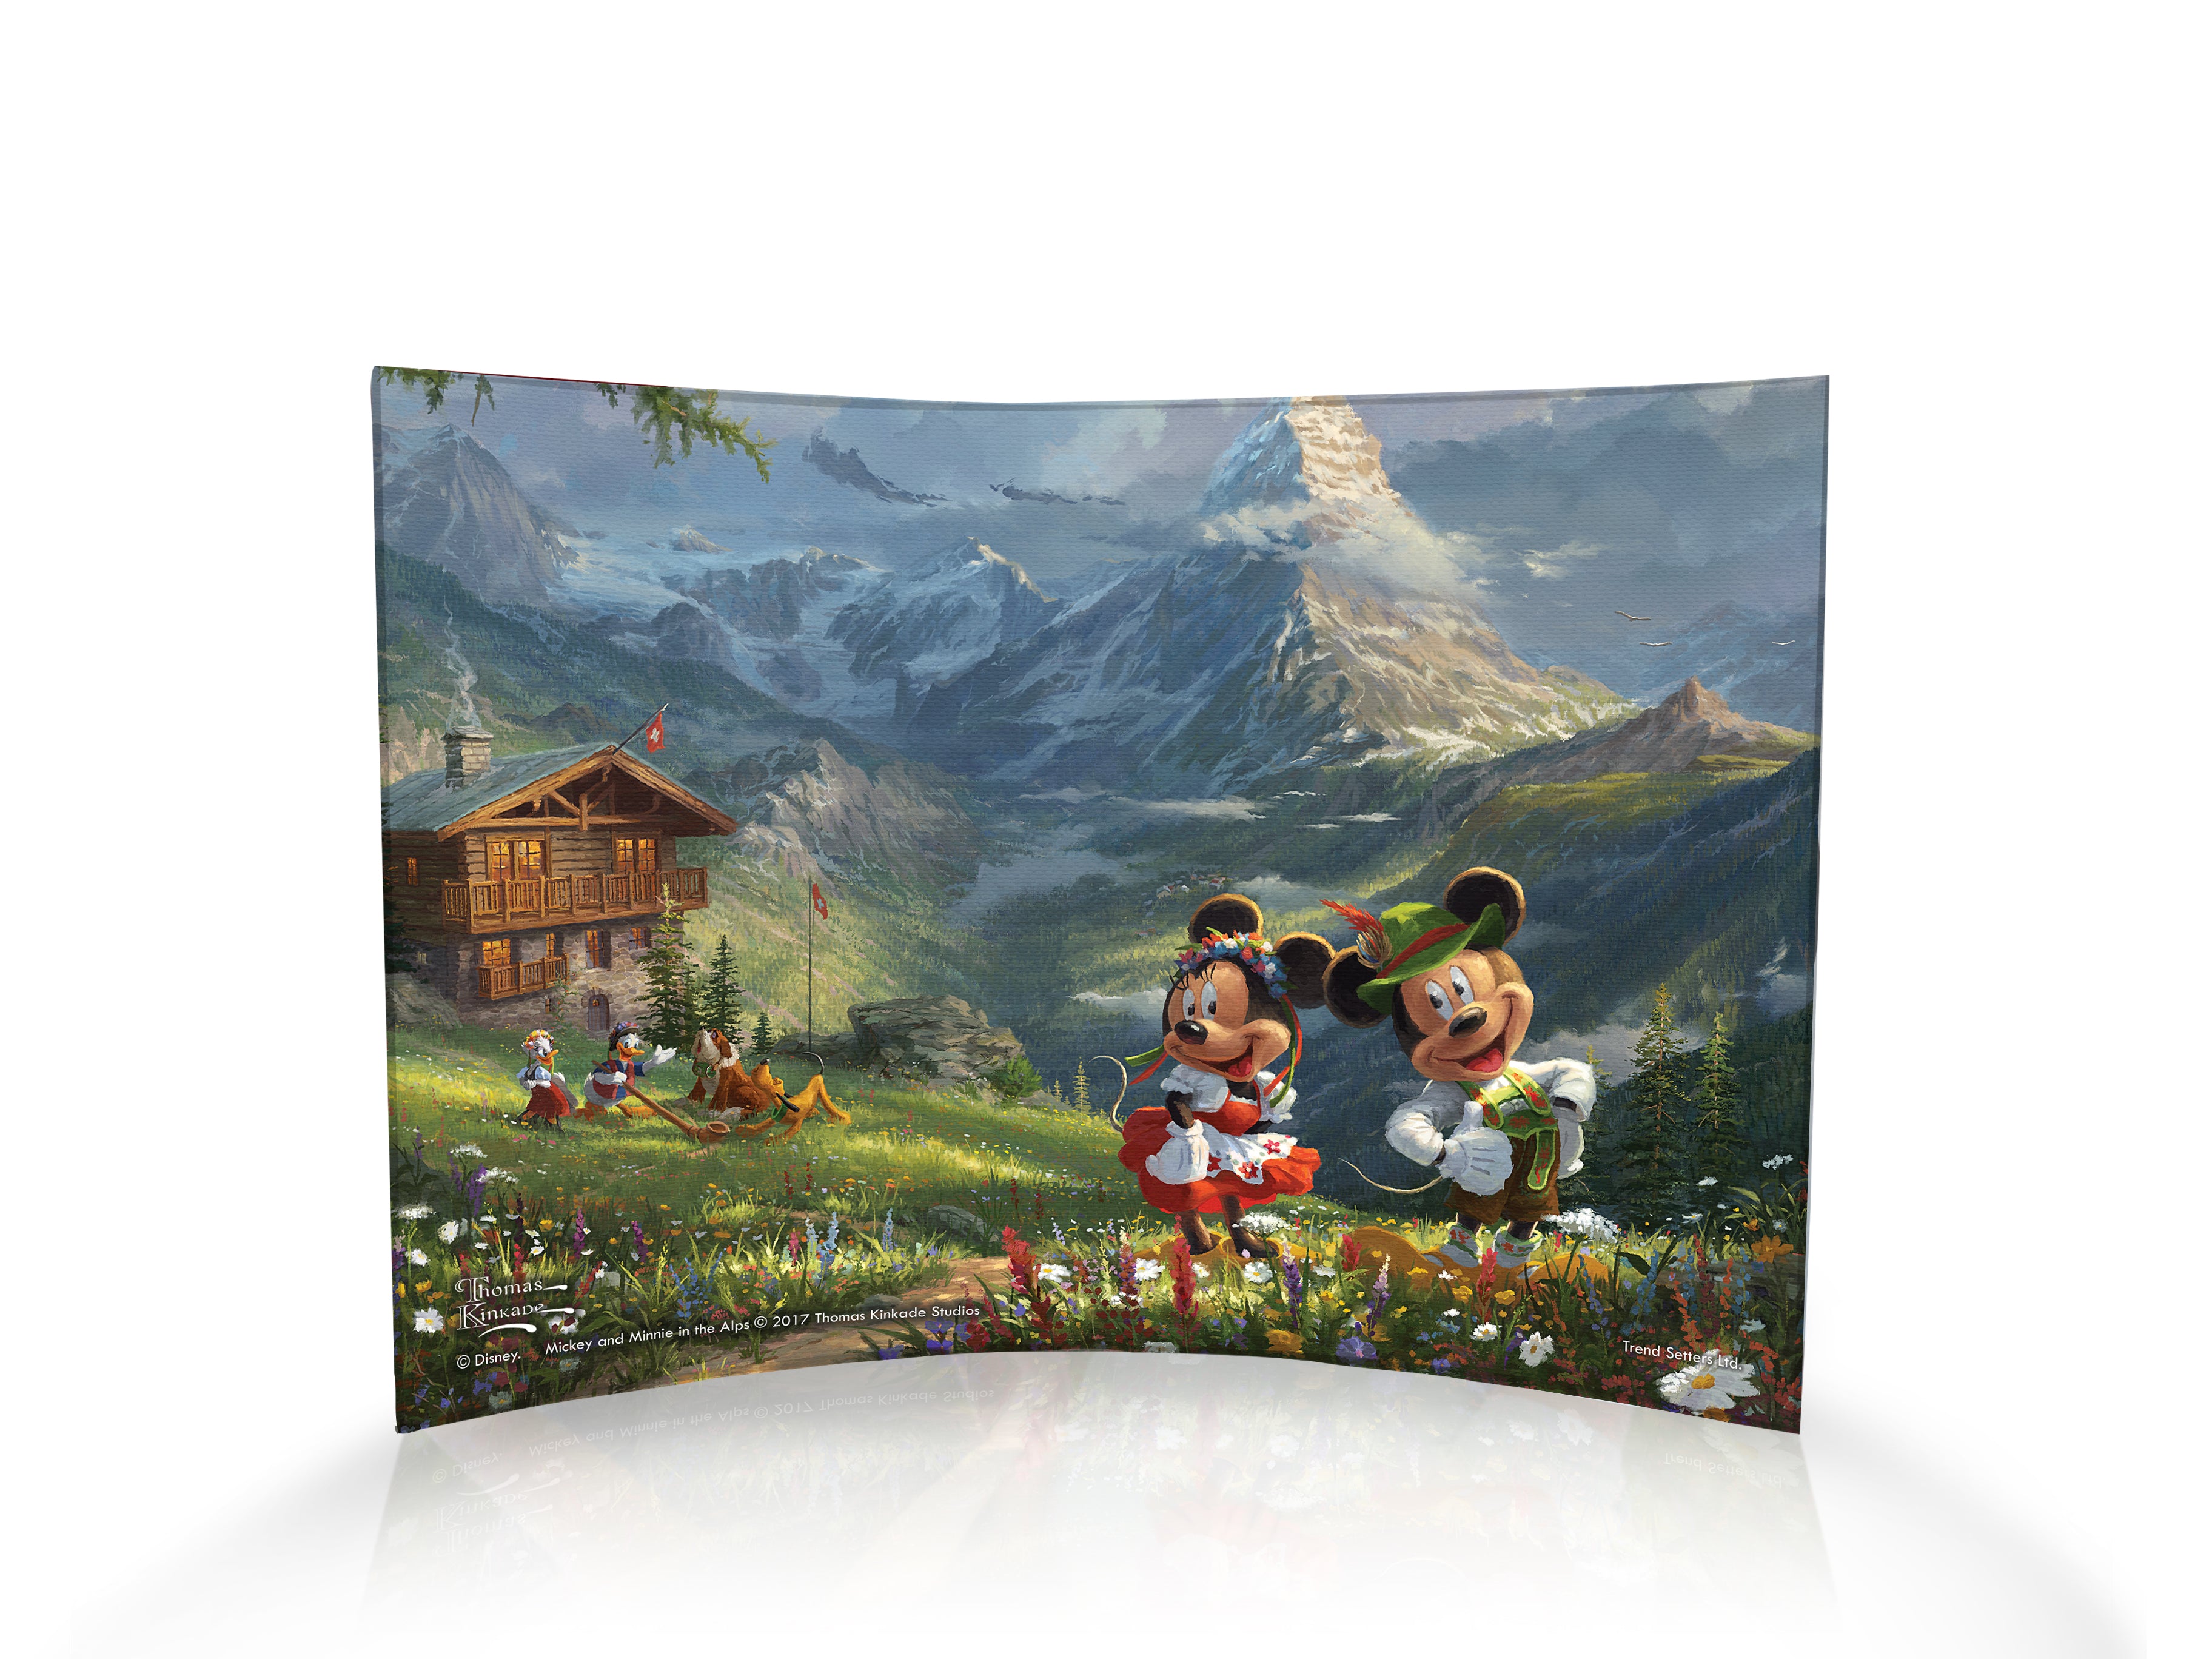 Disney (Mickey and Minnie in the Alps) 10